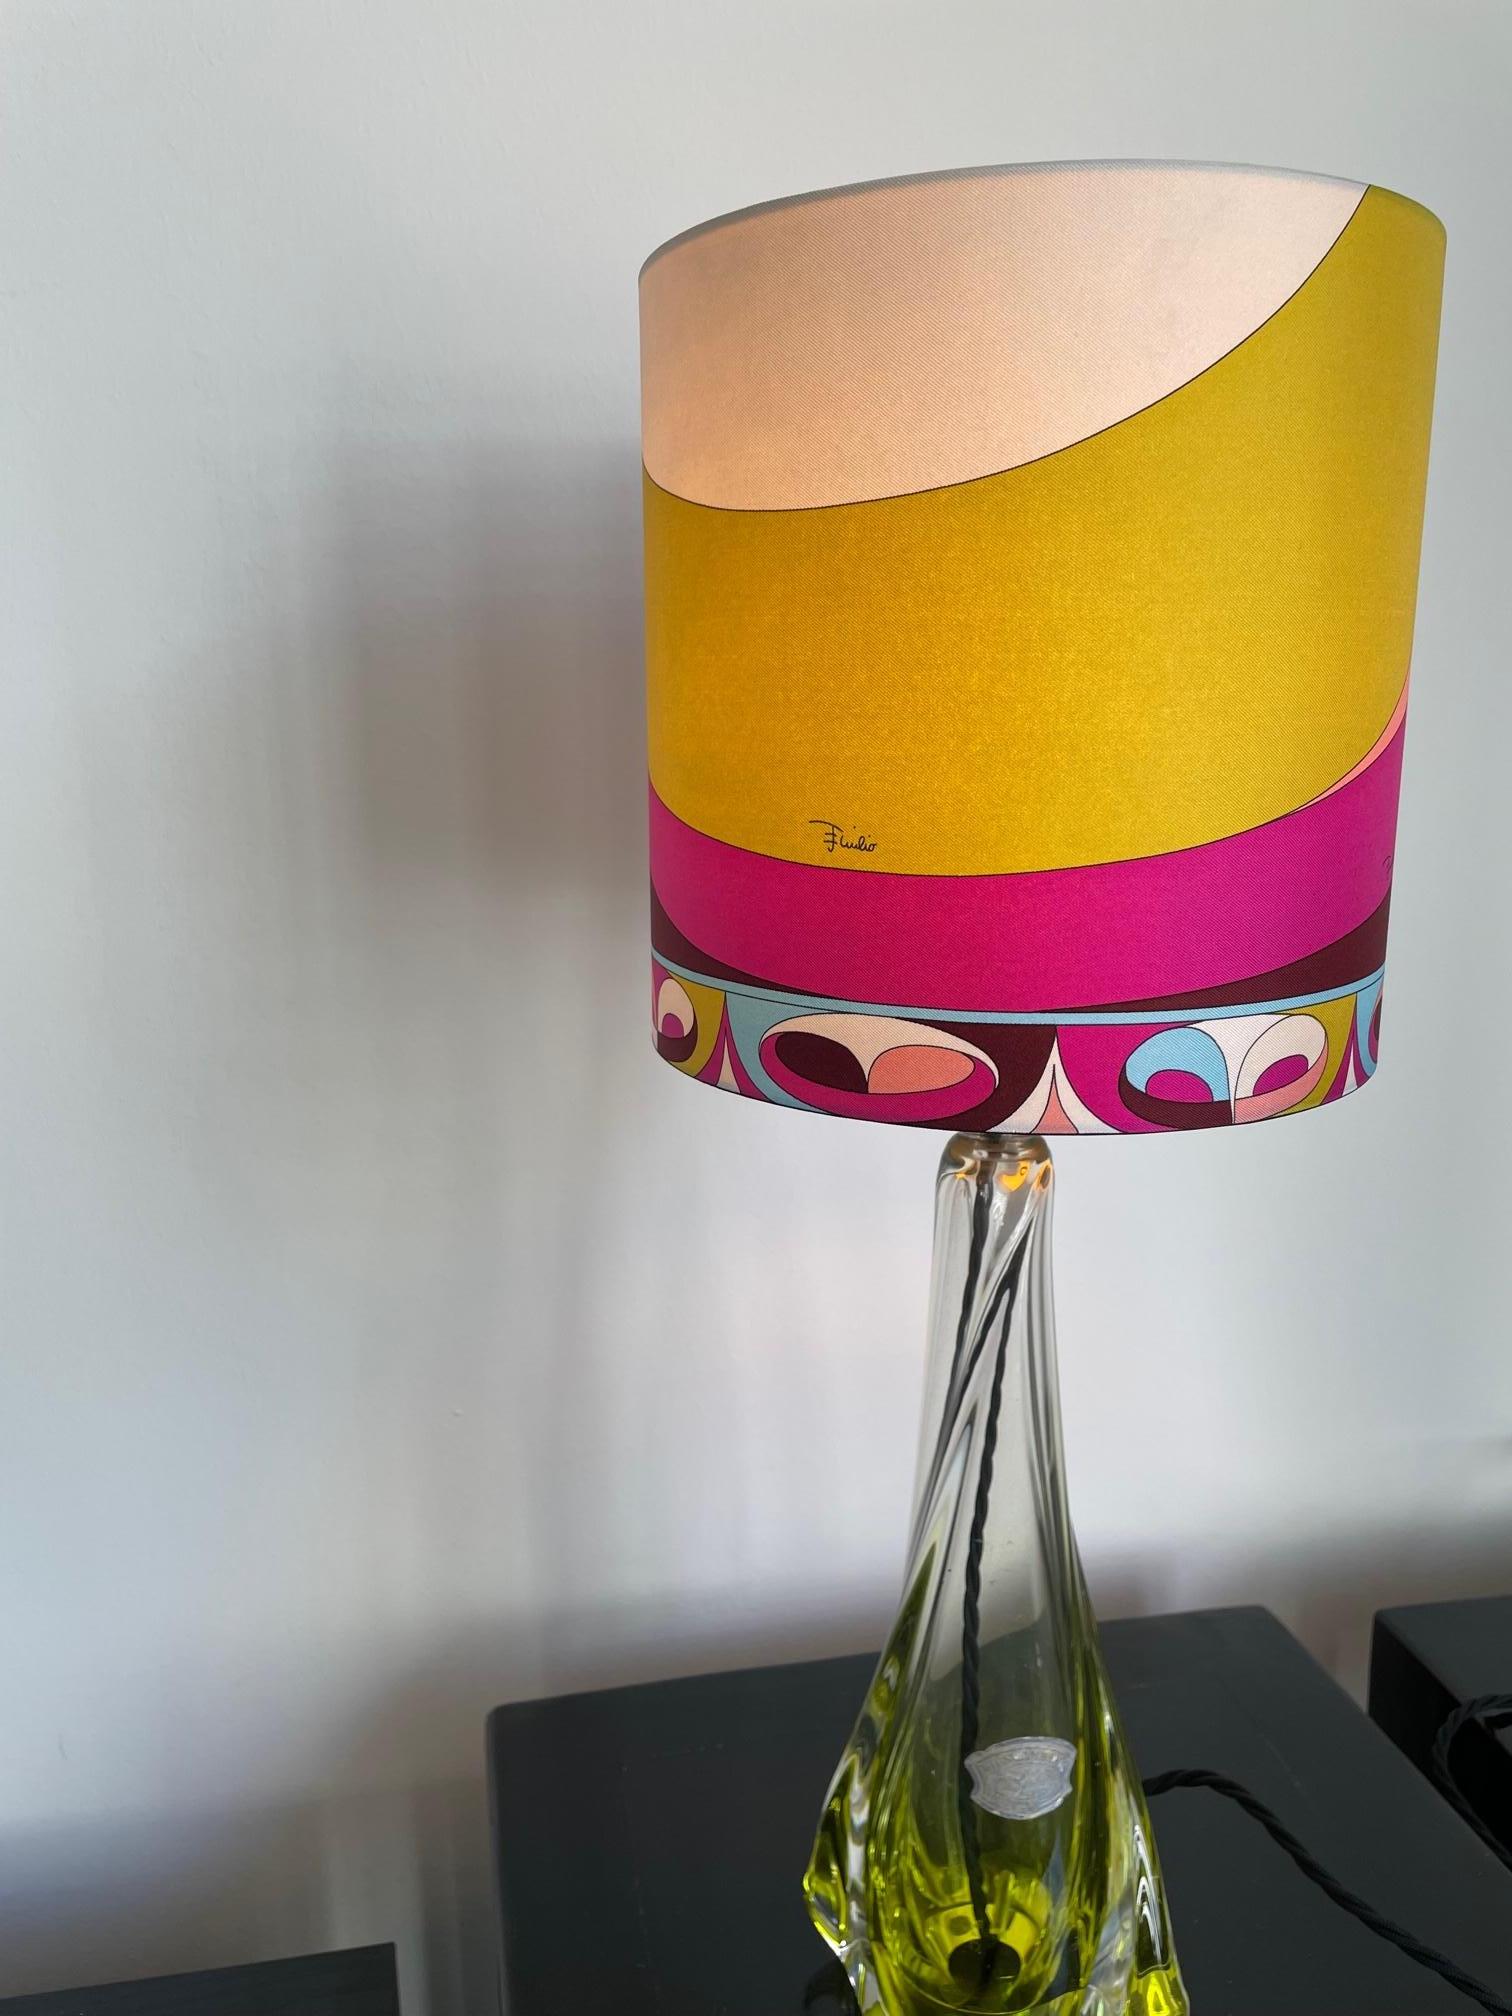 Unique Table Light: Val Saint Lambert crystal lamp base,
Size crystal base 33 cm H x 15 cm W
Total height table lamp: base with lamp shade 55 cm,
Lamp shade in printed twill silk, colors: wine red, ginger, pink, white and blue, teal green signed